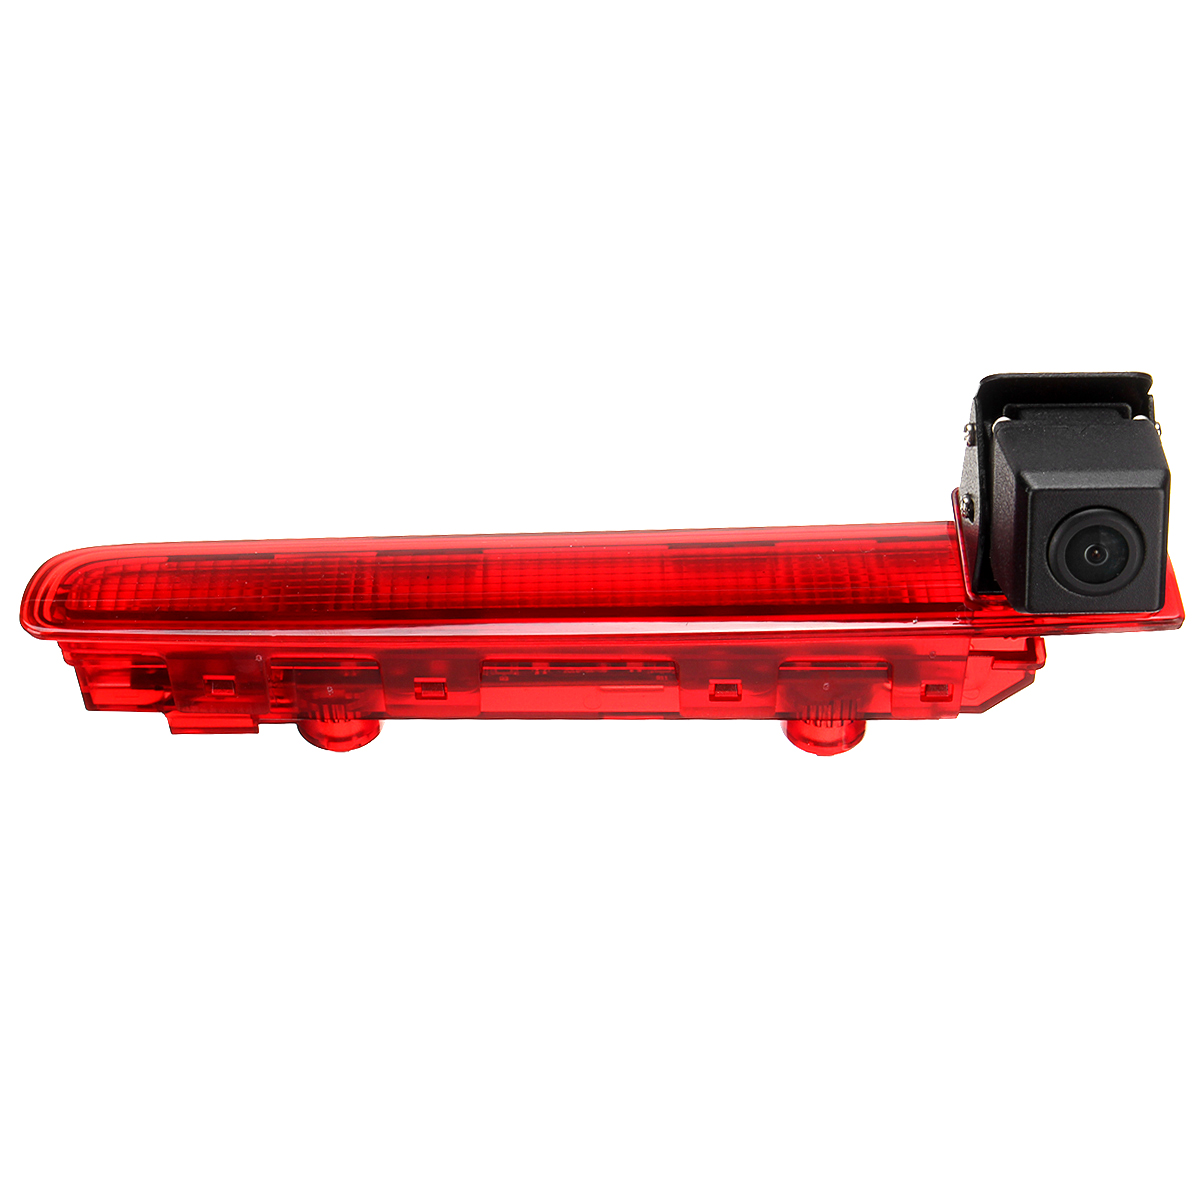 Car 170° Third Brake Light Rearview Mounting Monitor with Camera for VW Transporter T5&T6 Van 2003+ - Auto GoShop